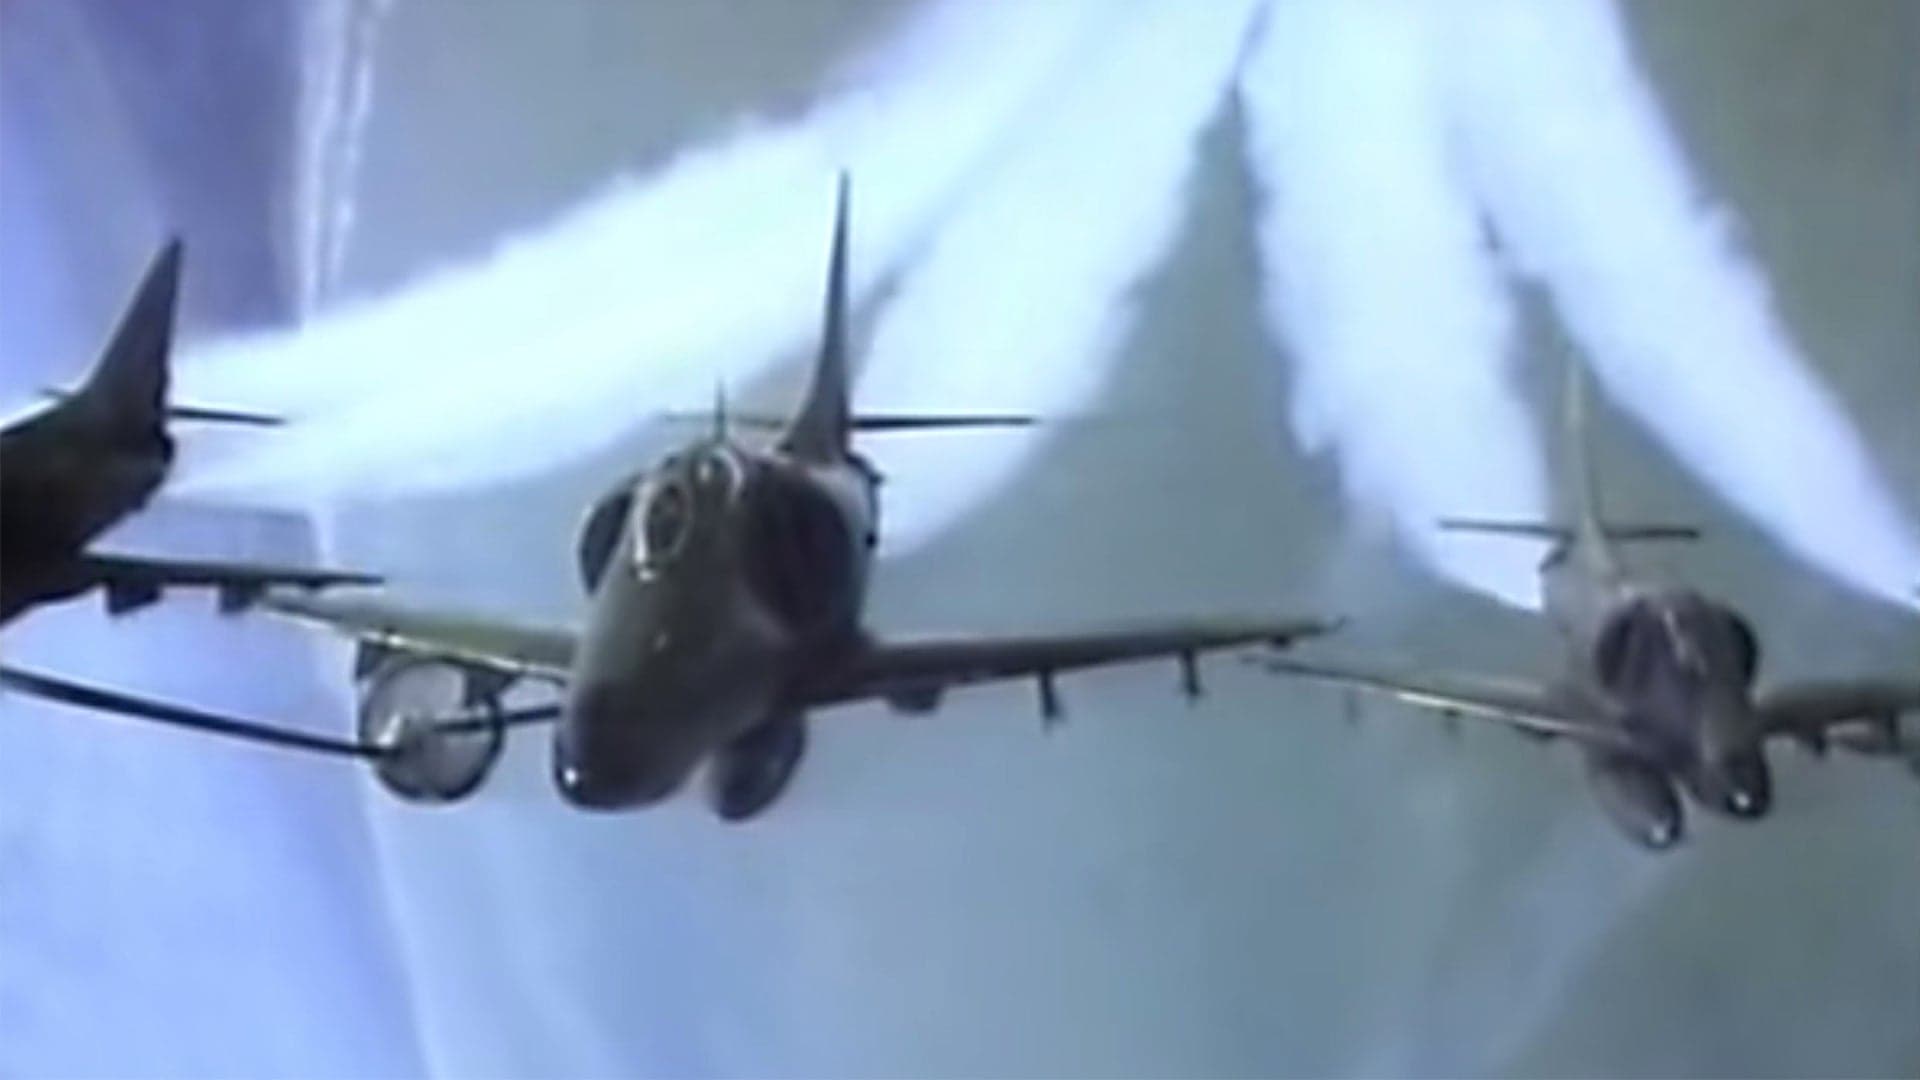 New Zealand A-4s Flew Crazy Formation Rolls While “Plugged-In” To A Buddy Tanker